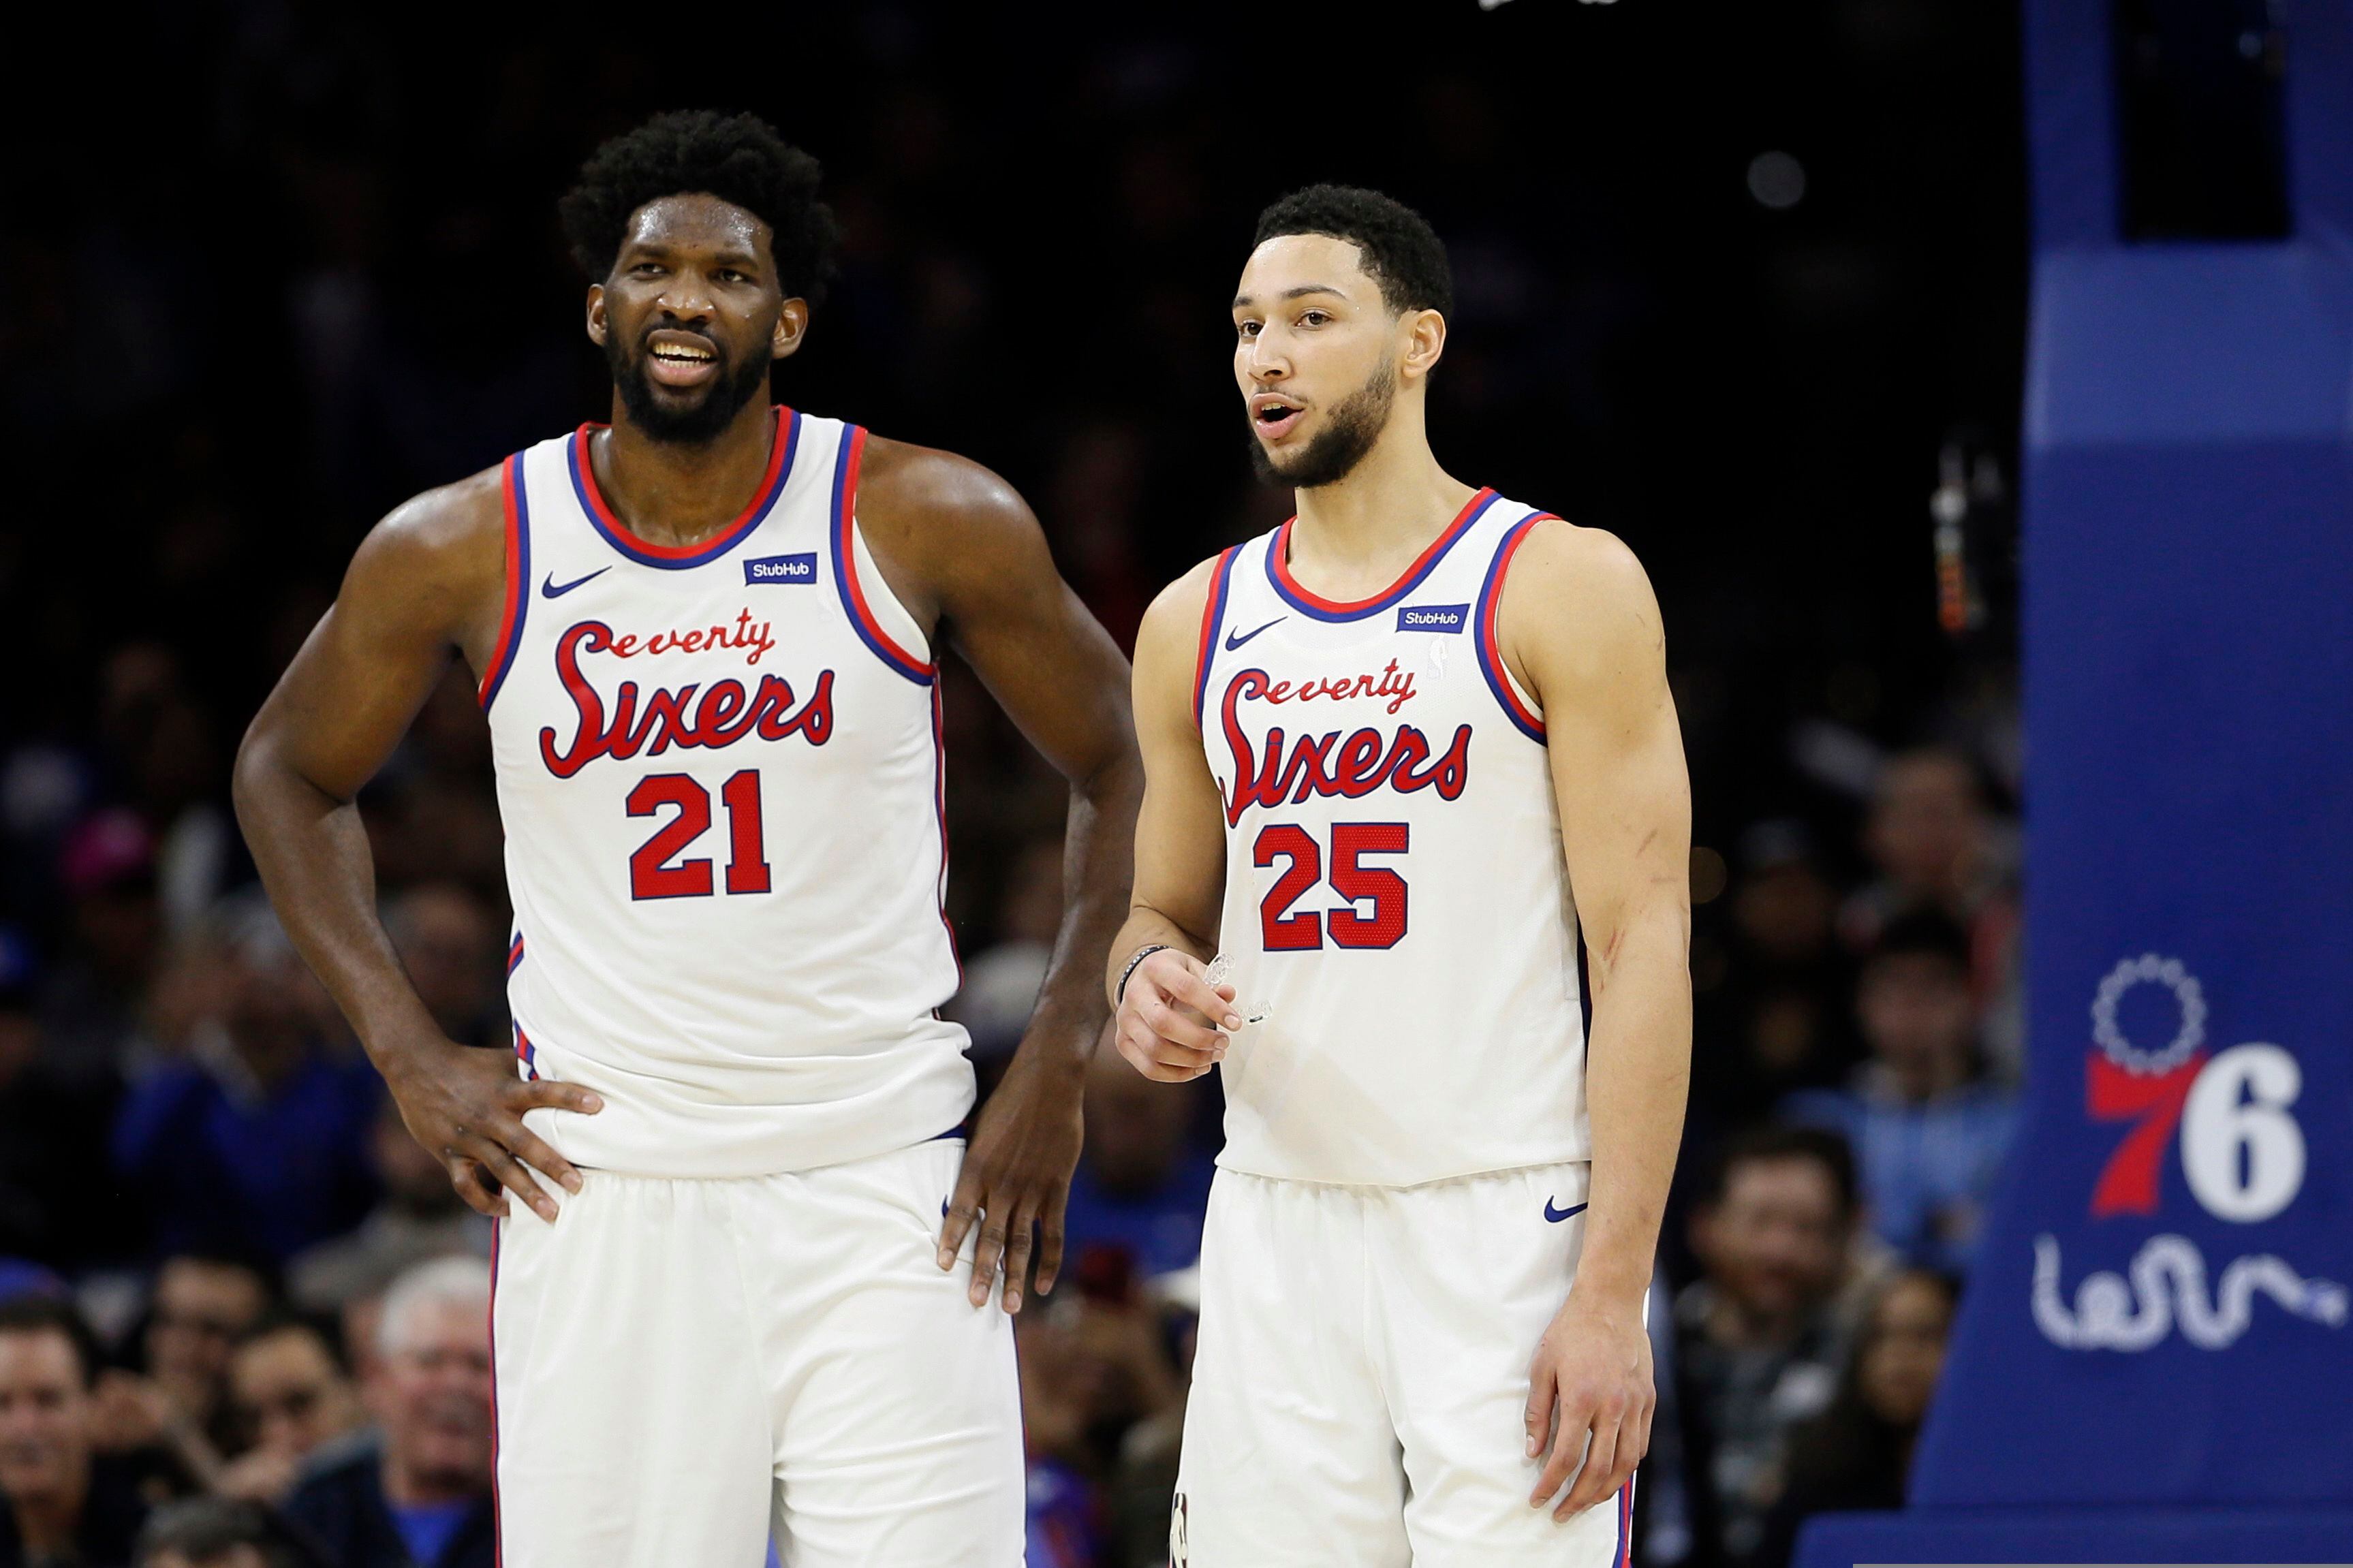 Bring the old Sixers uniforms back ! (S4G petition)